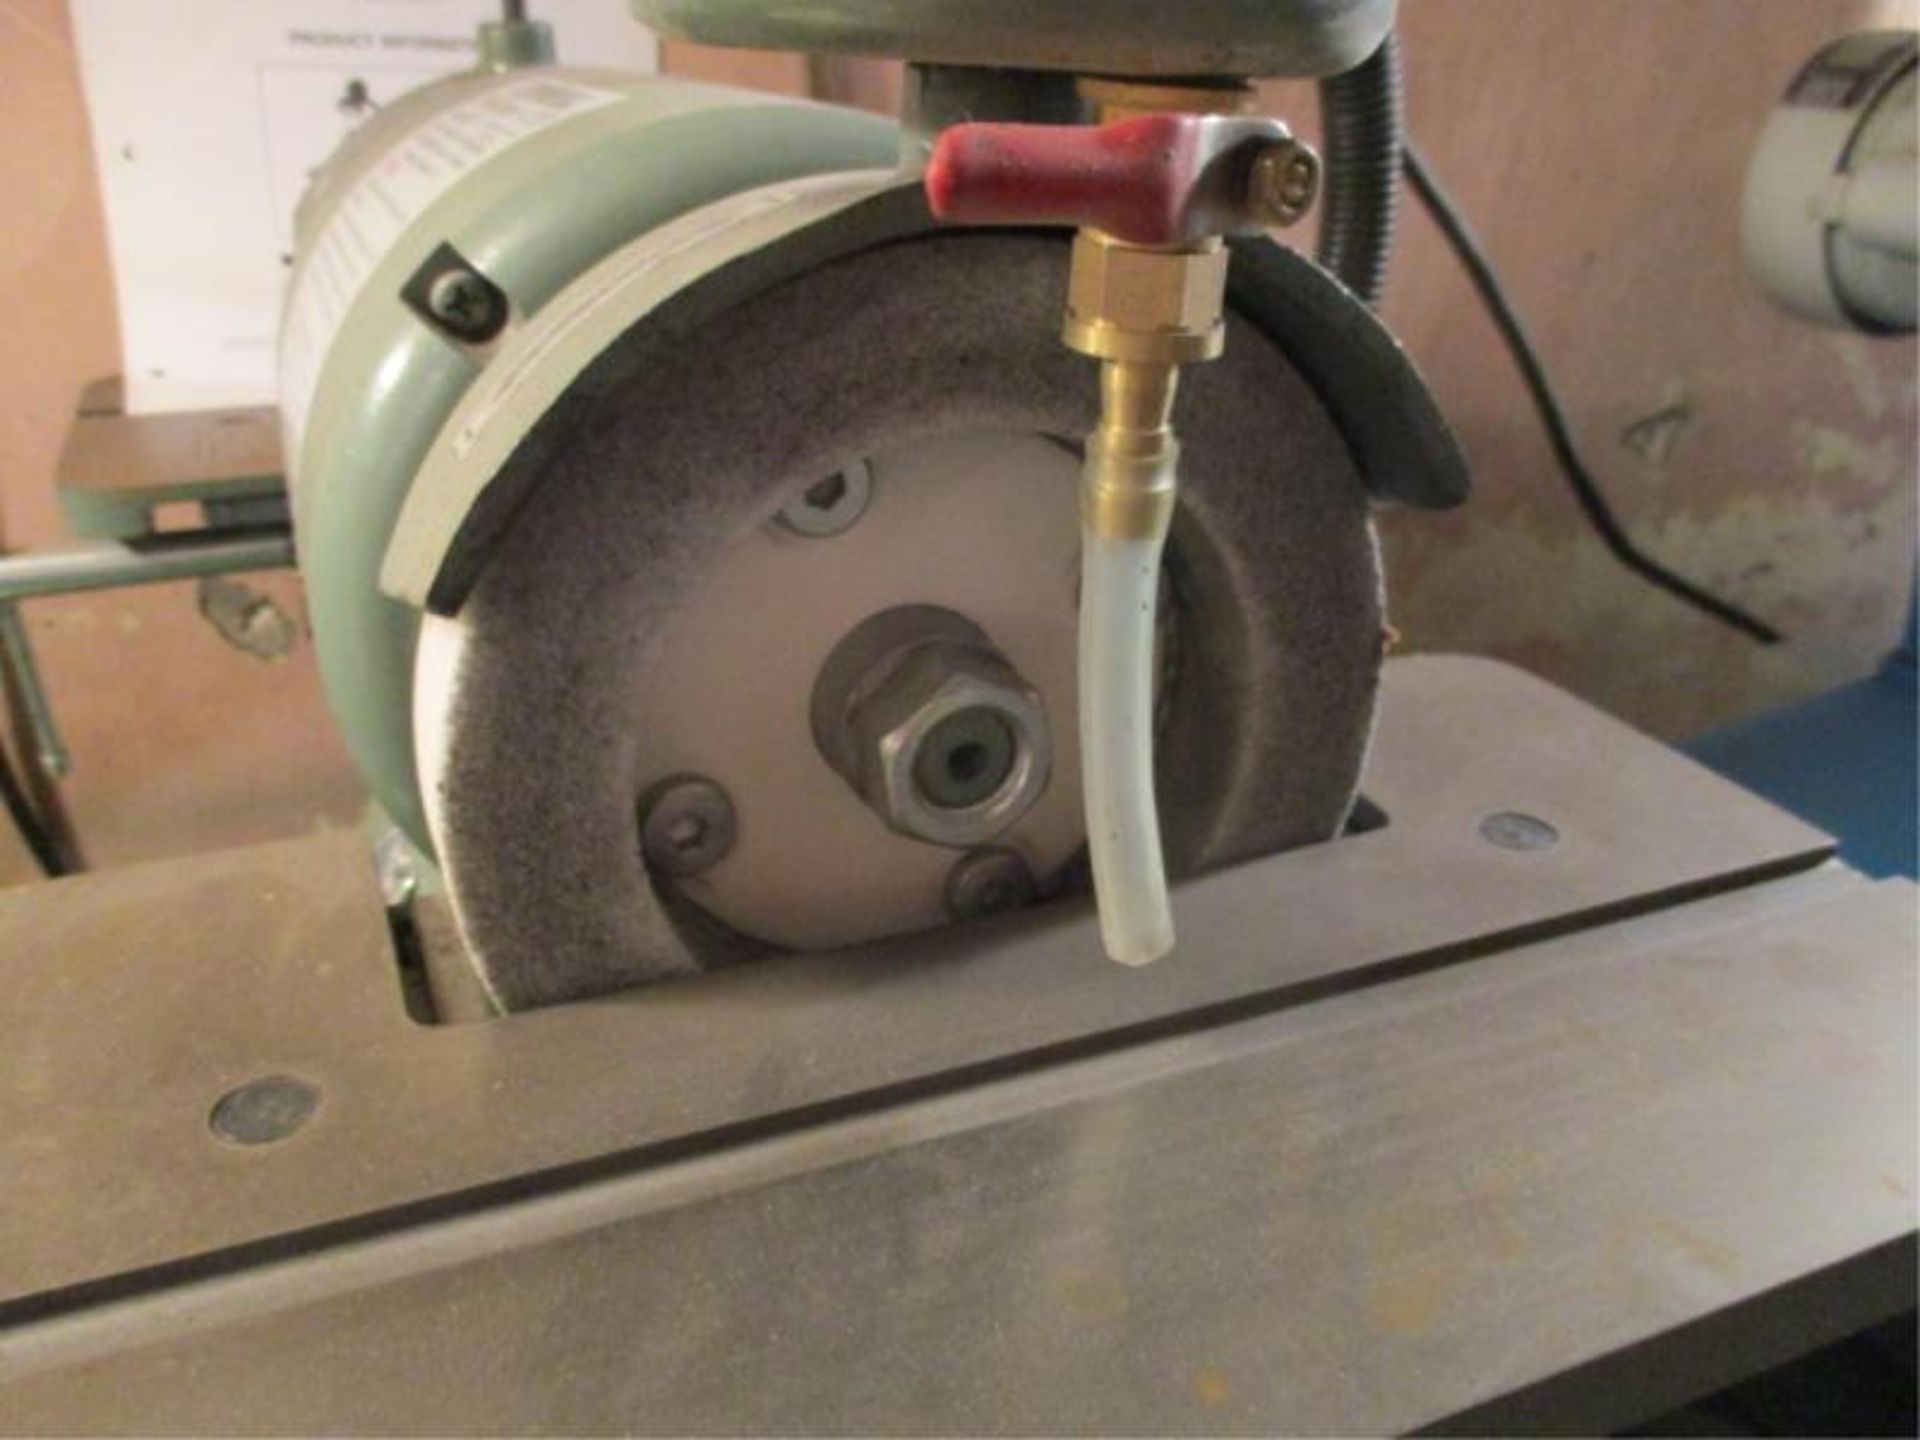 Tool Grinder, 6", 1/2 HP, By Central Machinery Industrial, Item #46727, Single Phase, 6" Max. - Image 3 of 5